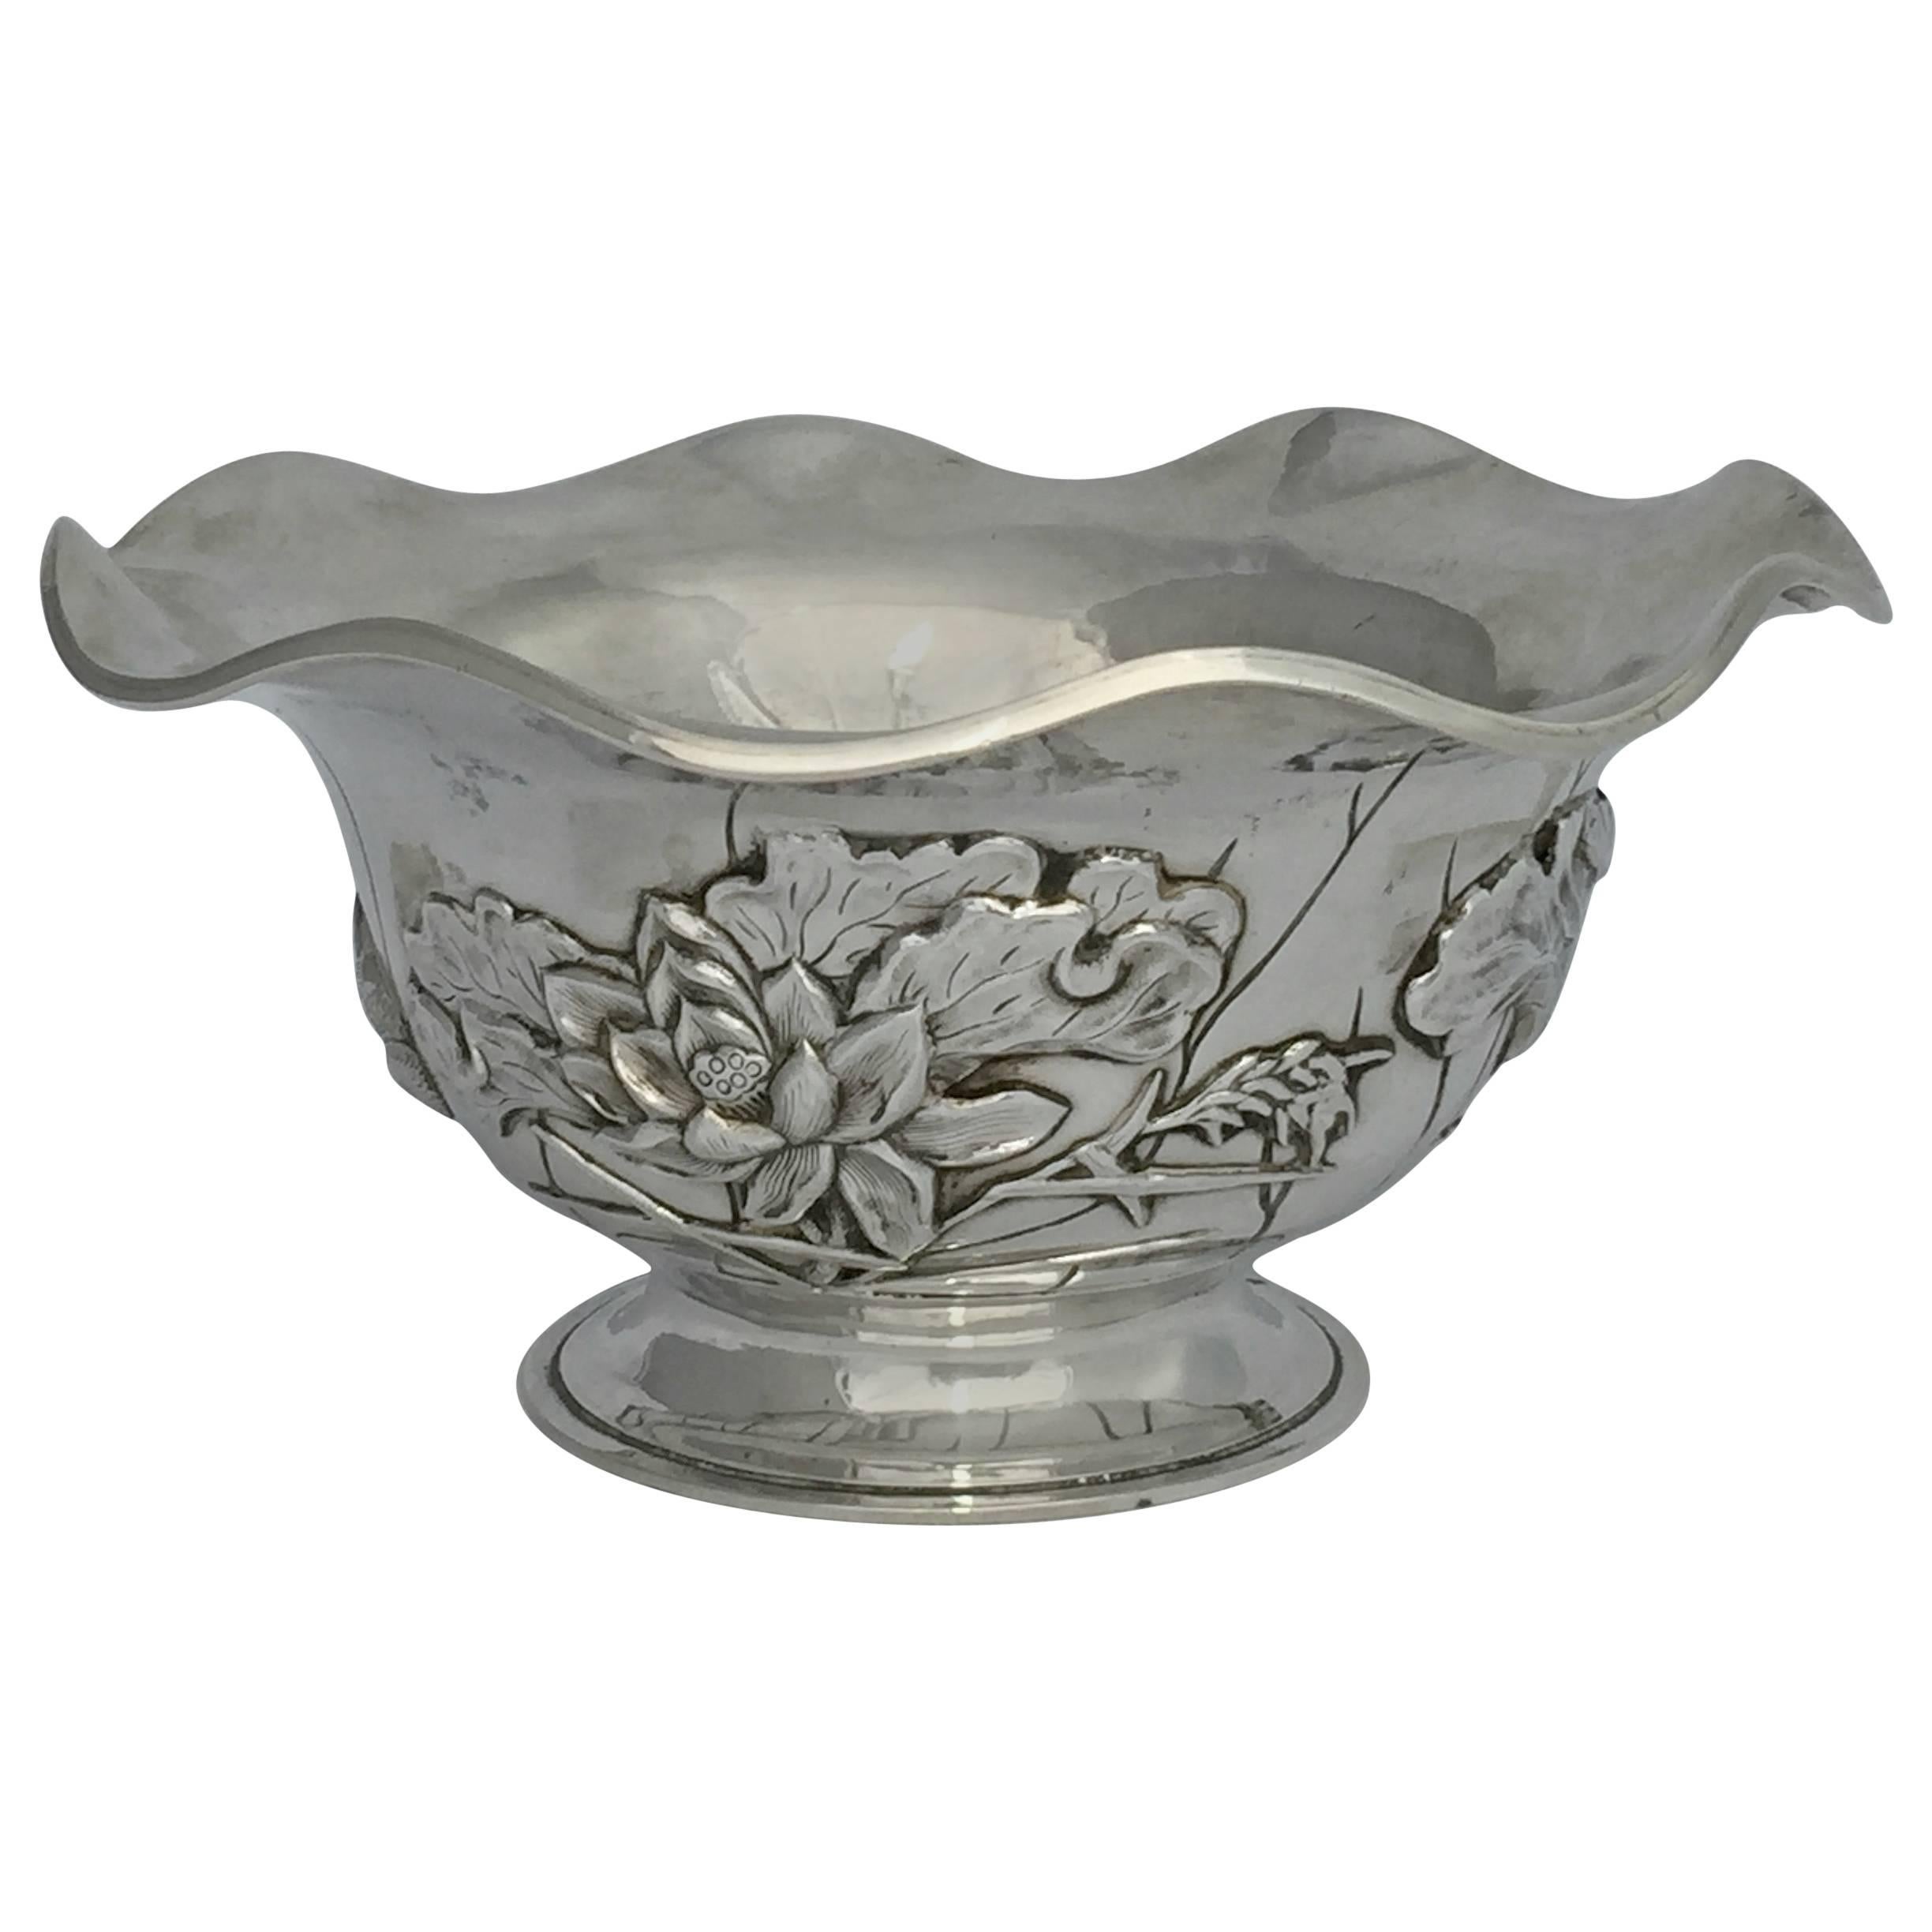 Chinese Export Silver Bowl by Luen Wo with Lotus Detail